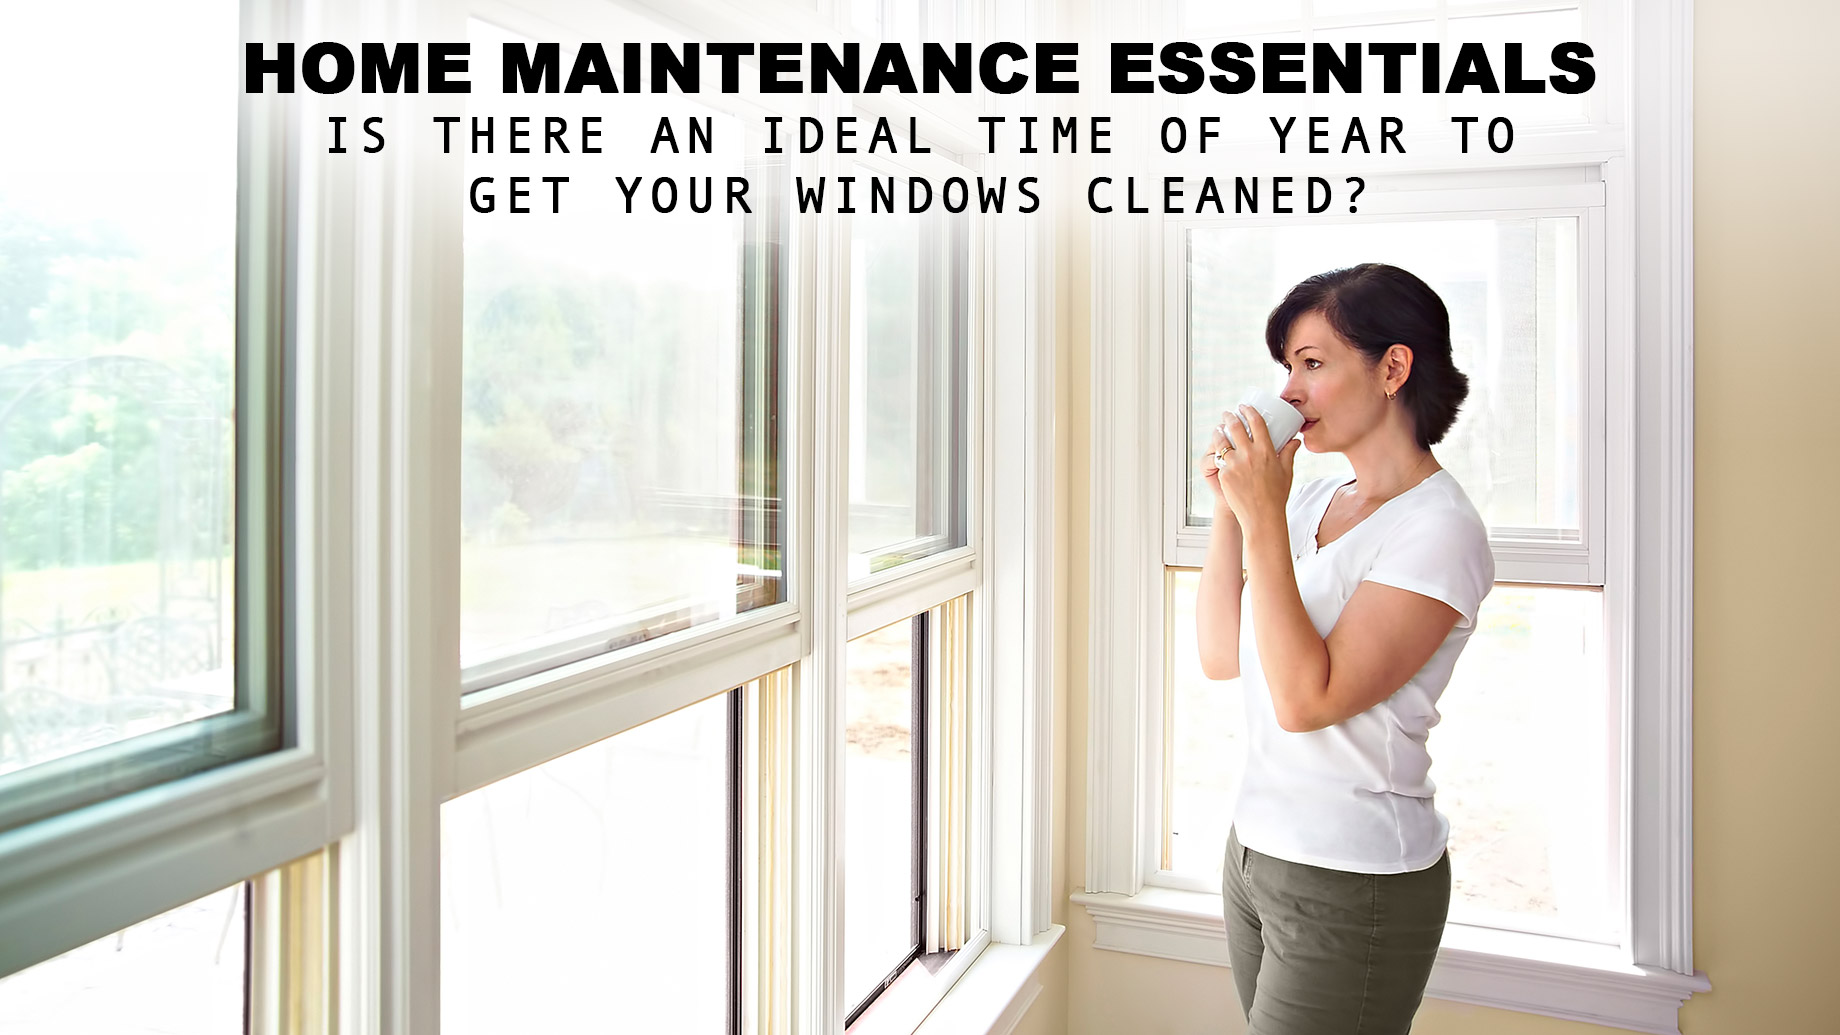 Home Maintenance Essentials - Is There an Ideal Time of Year to Get Your Windows Cleaned?